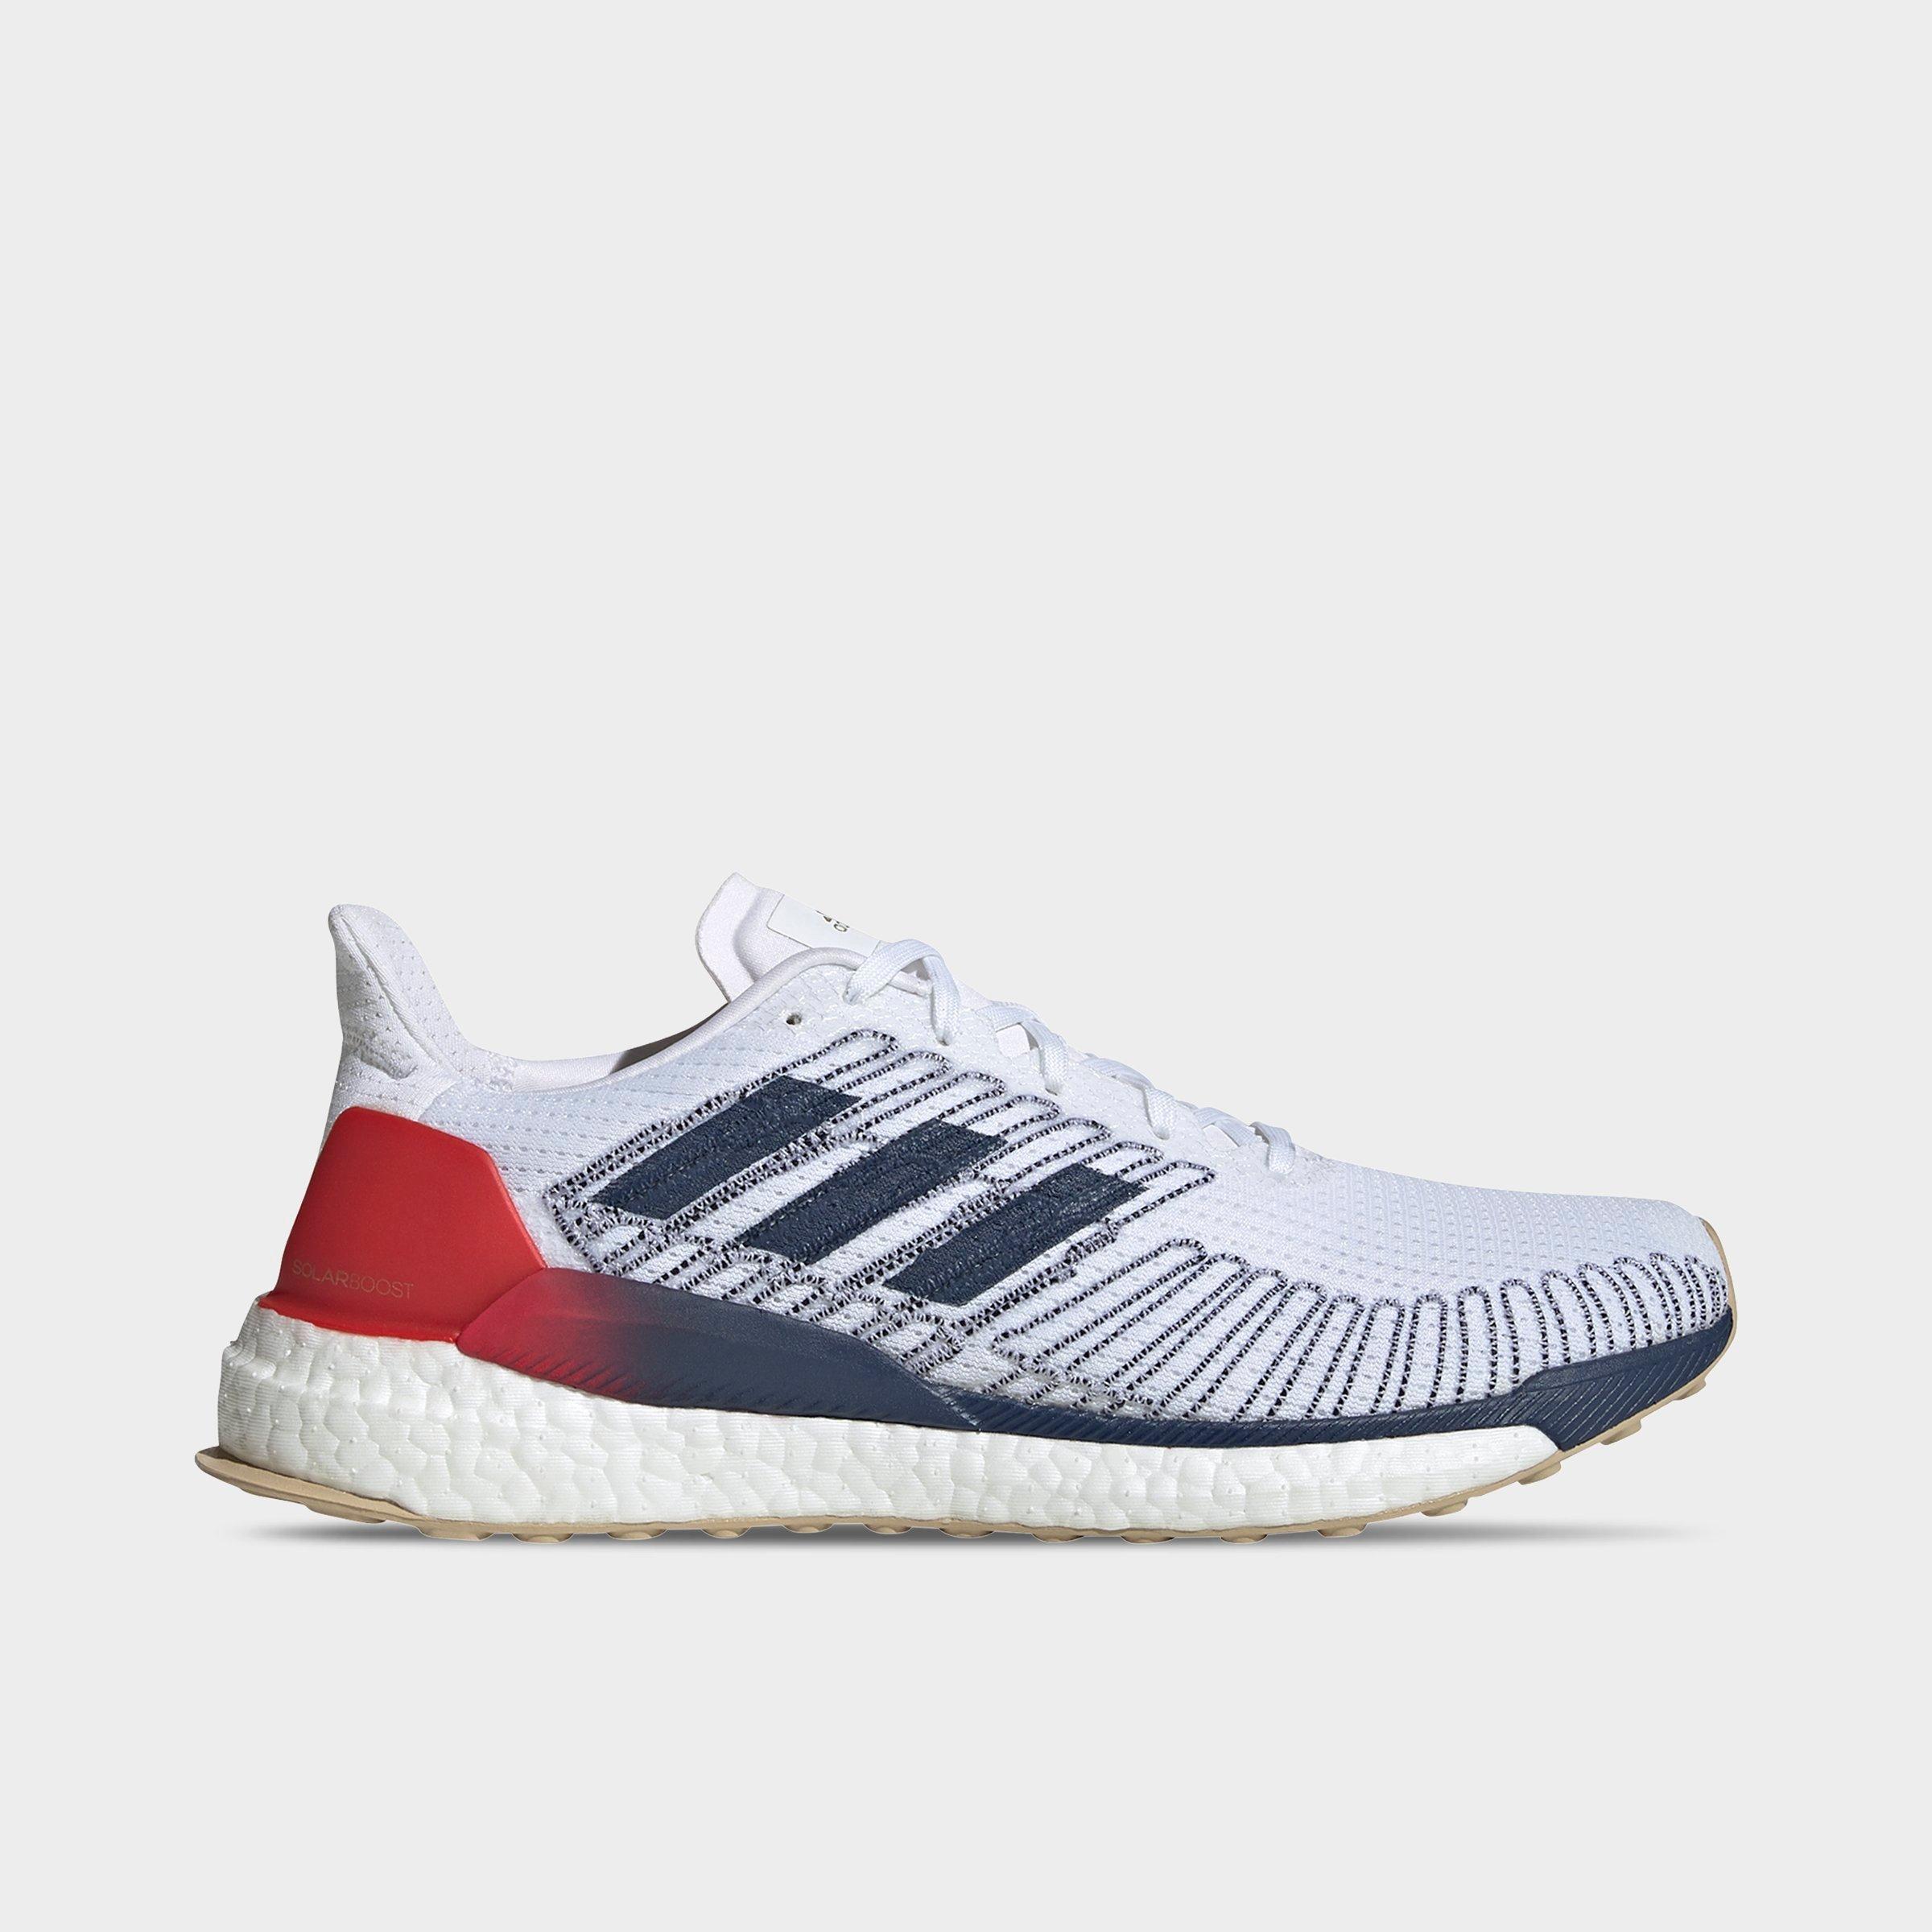 adidas SolarBOOST 19 Running Shoes 